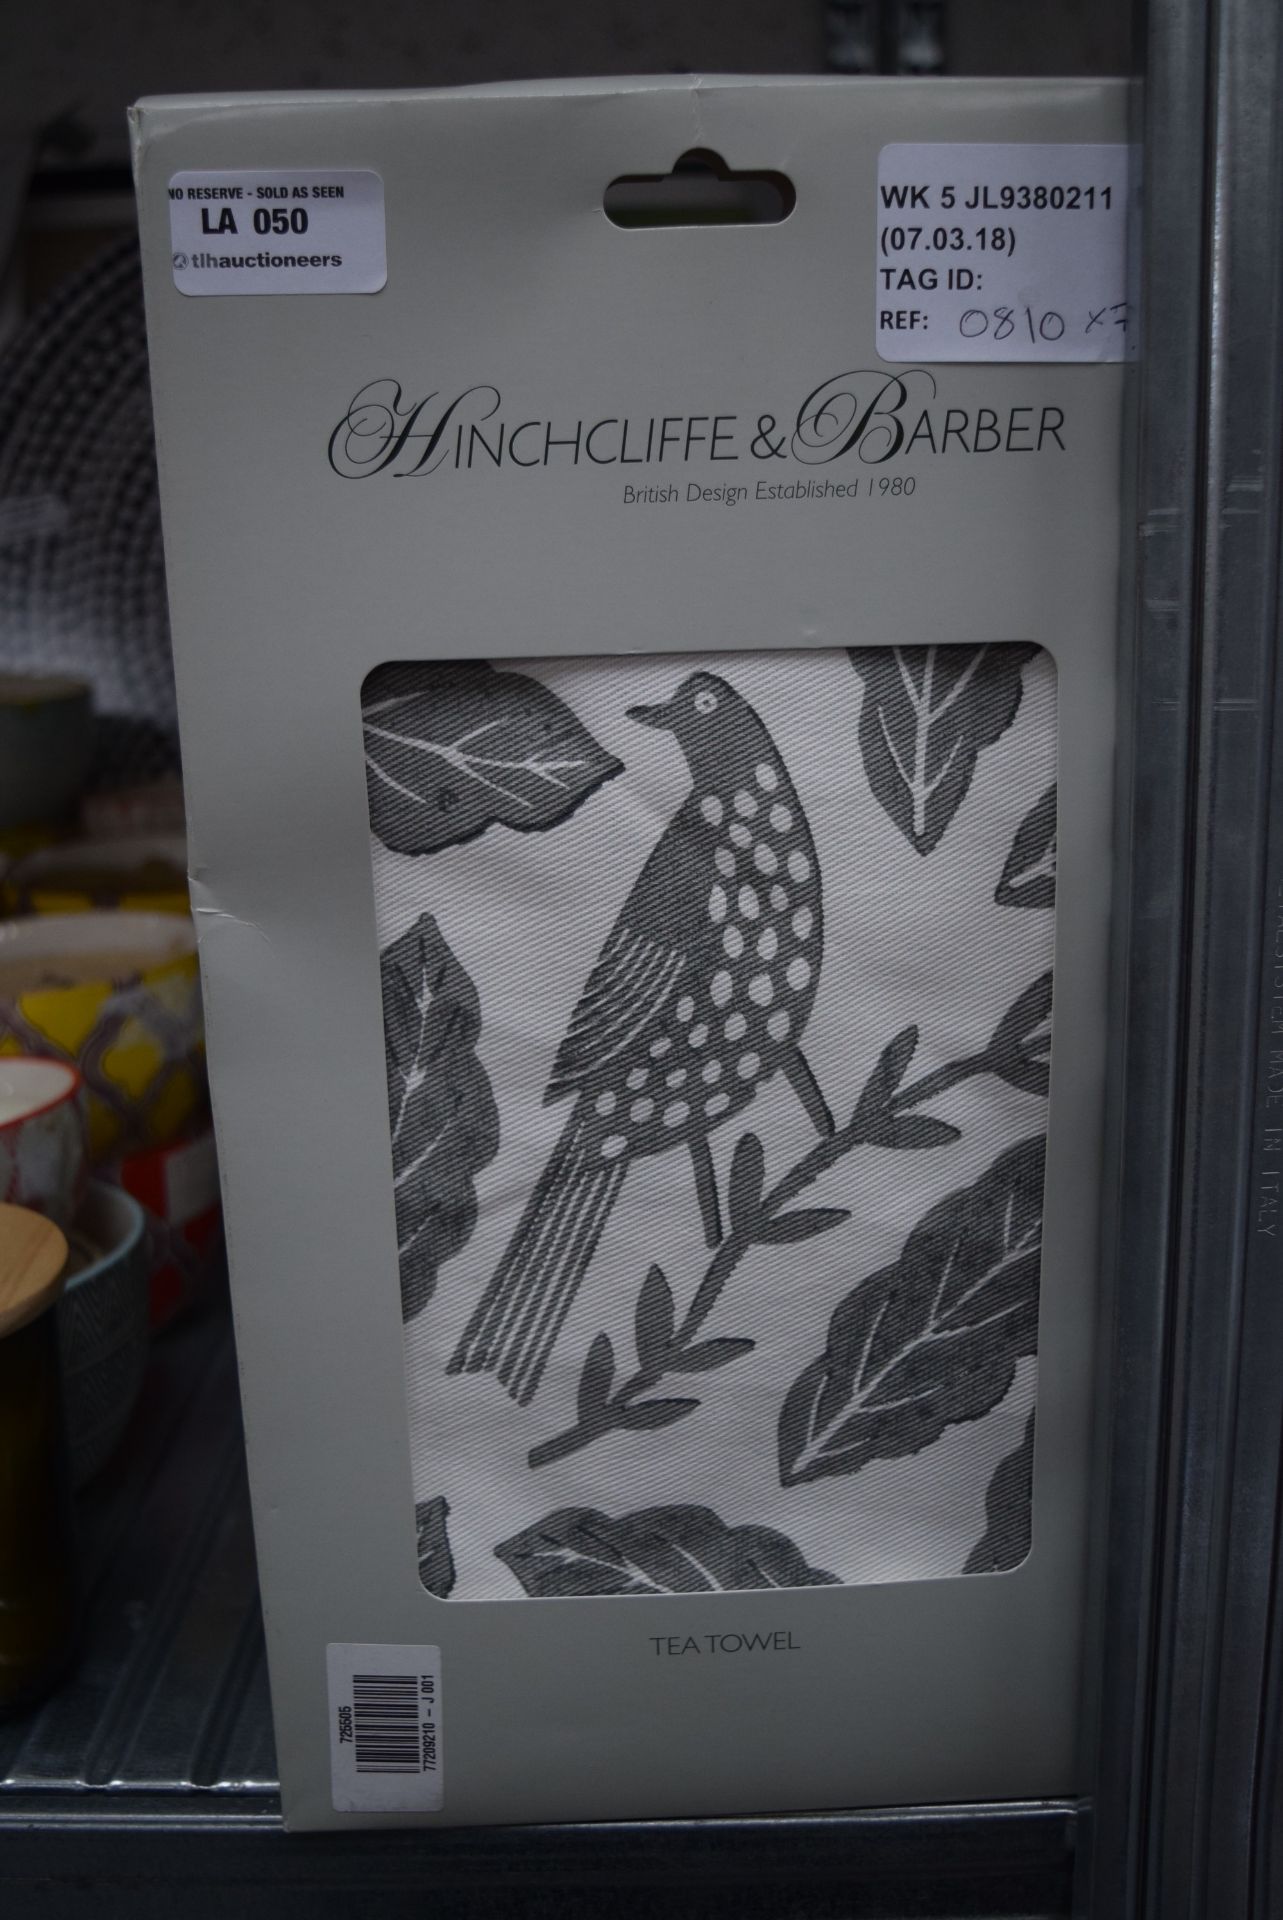 7 x HINCHCLIFFE AND BARBER TEA TOWELS RRP £25 EACH 07.03.18 *PLEASE NOTE THAT THE BID PRICE IS